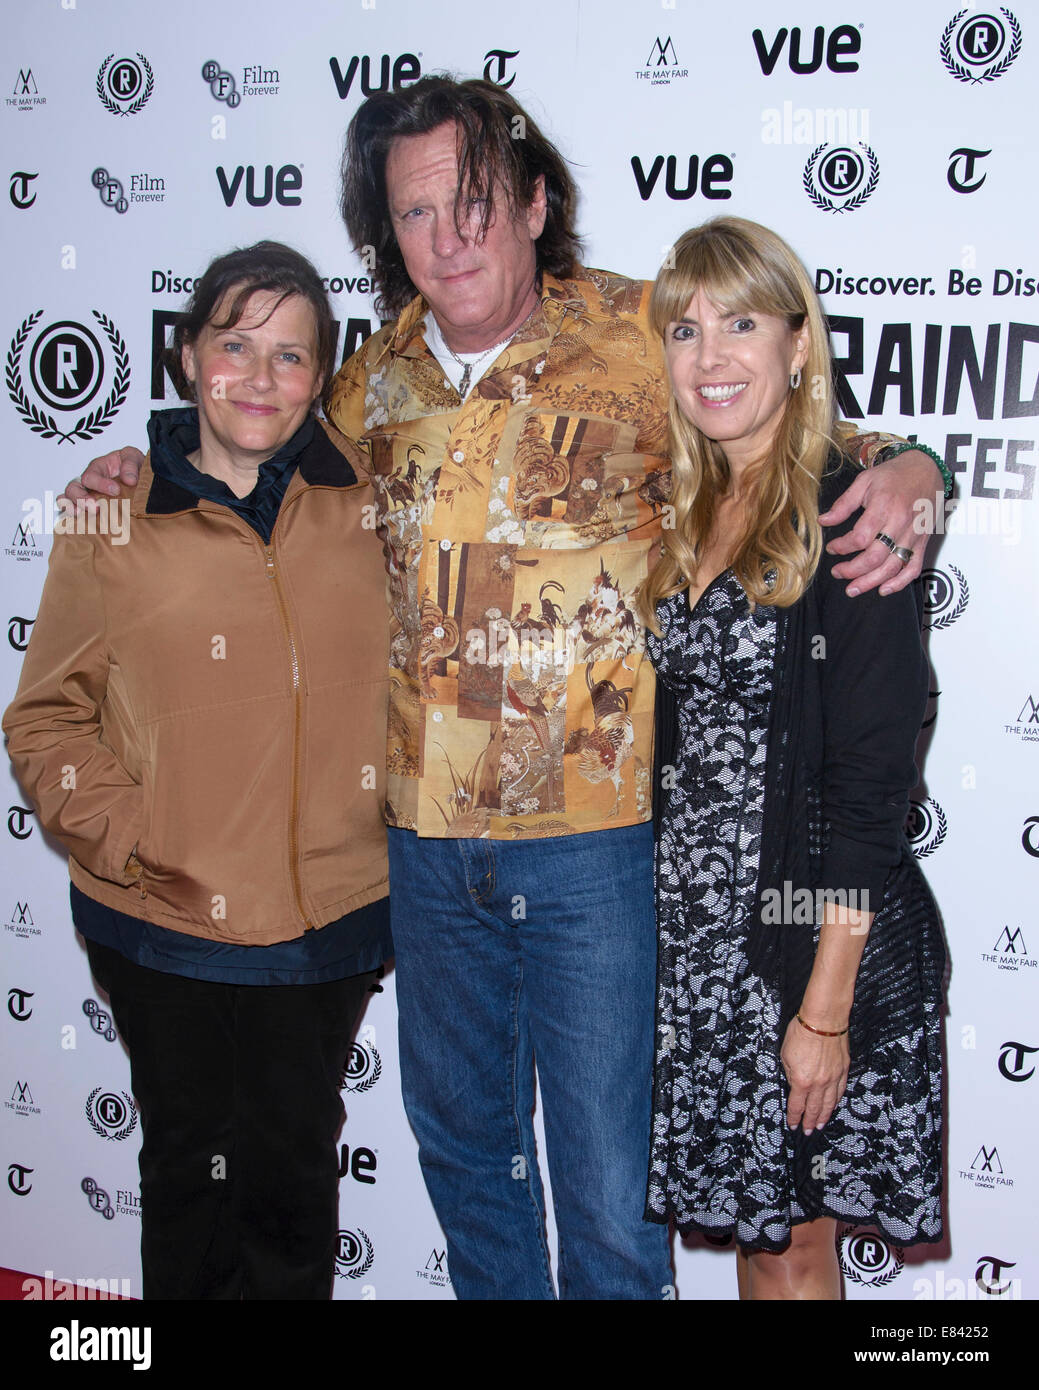 Cast and Crew attends the European premiere of THE NINTH CLOUD at Raindance Film Festival on 29/09/2014 at The Vue Piccadilly, London. Persons pictured: Director Jane Spencer, Michael Madsen, Julia Verdin. Stock Photo